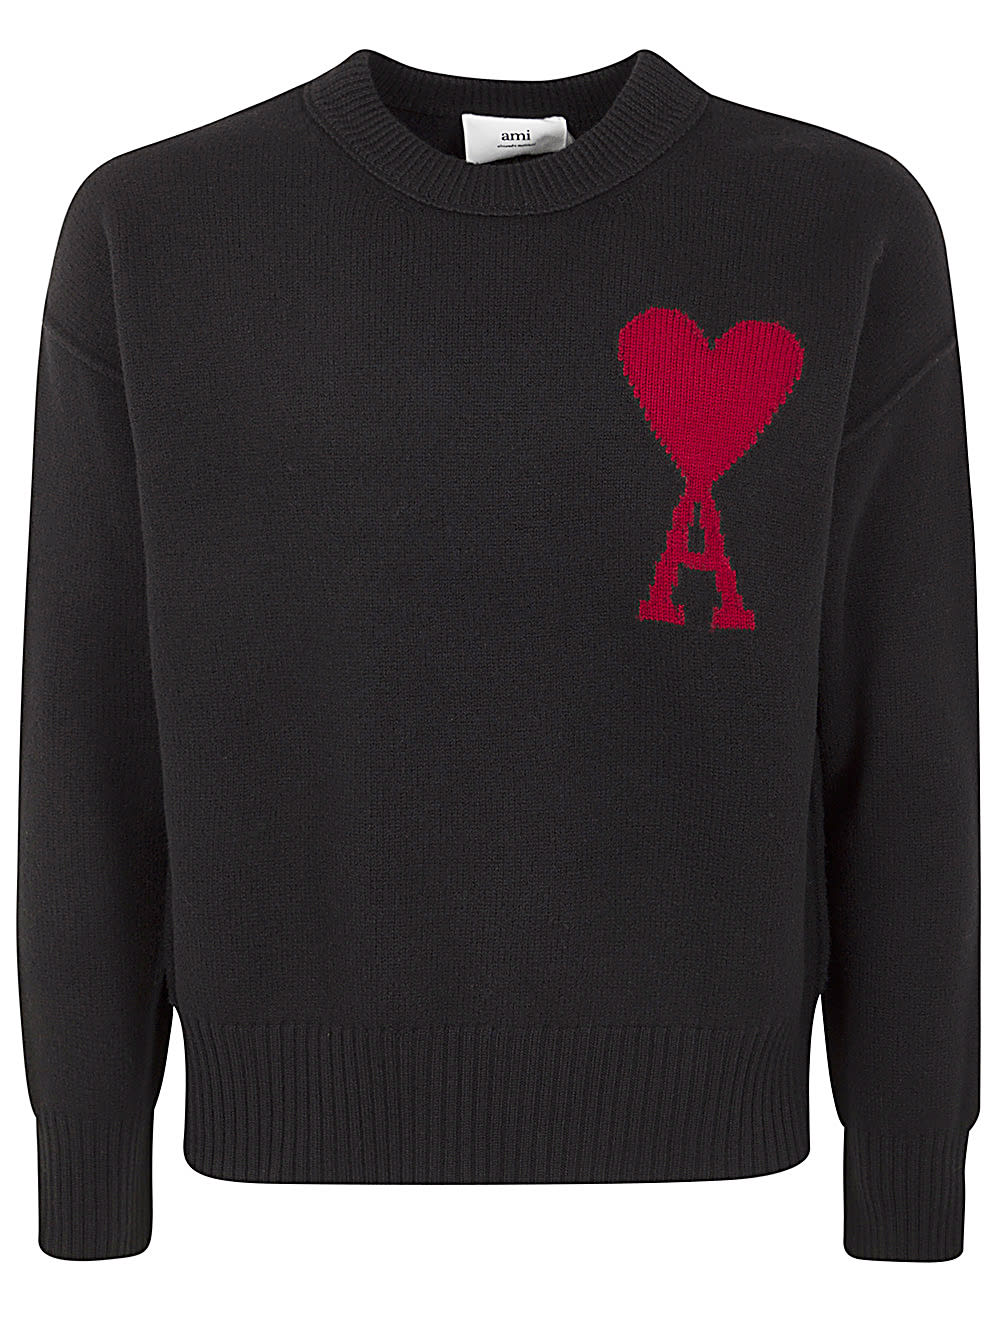 Red Adc Sweater